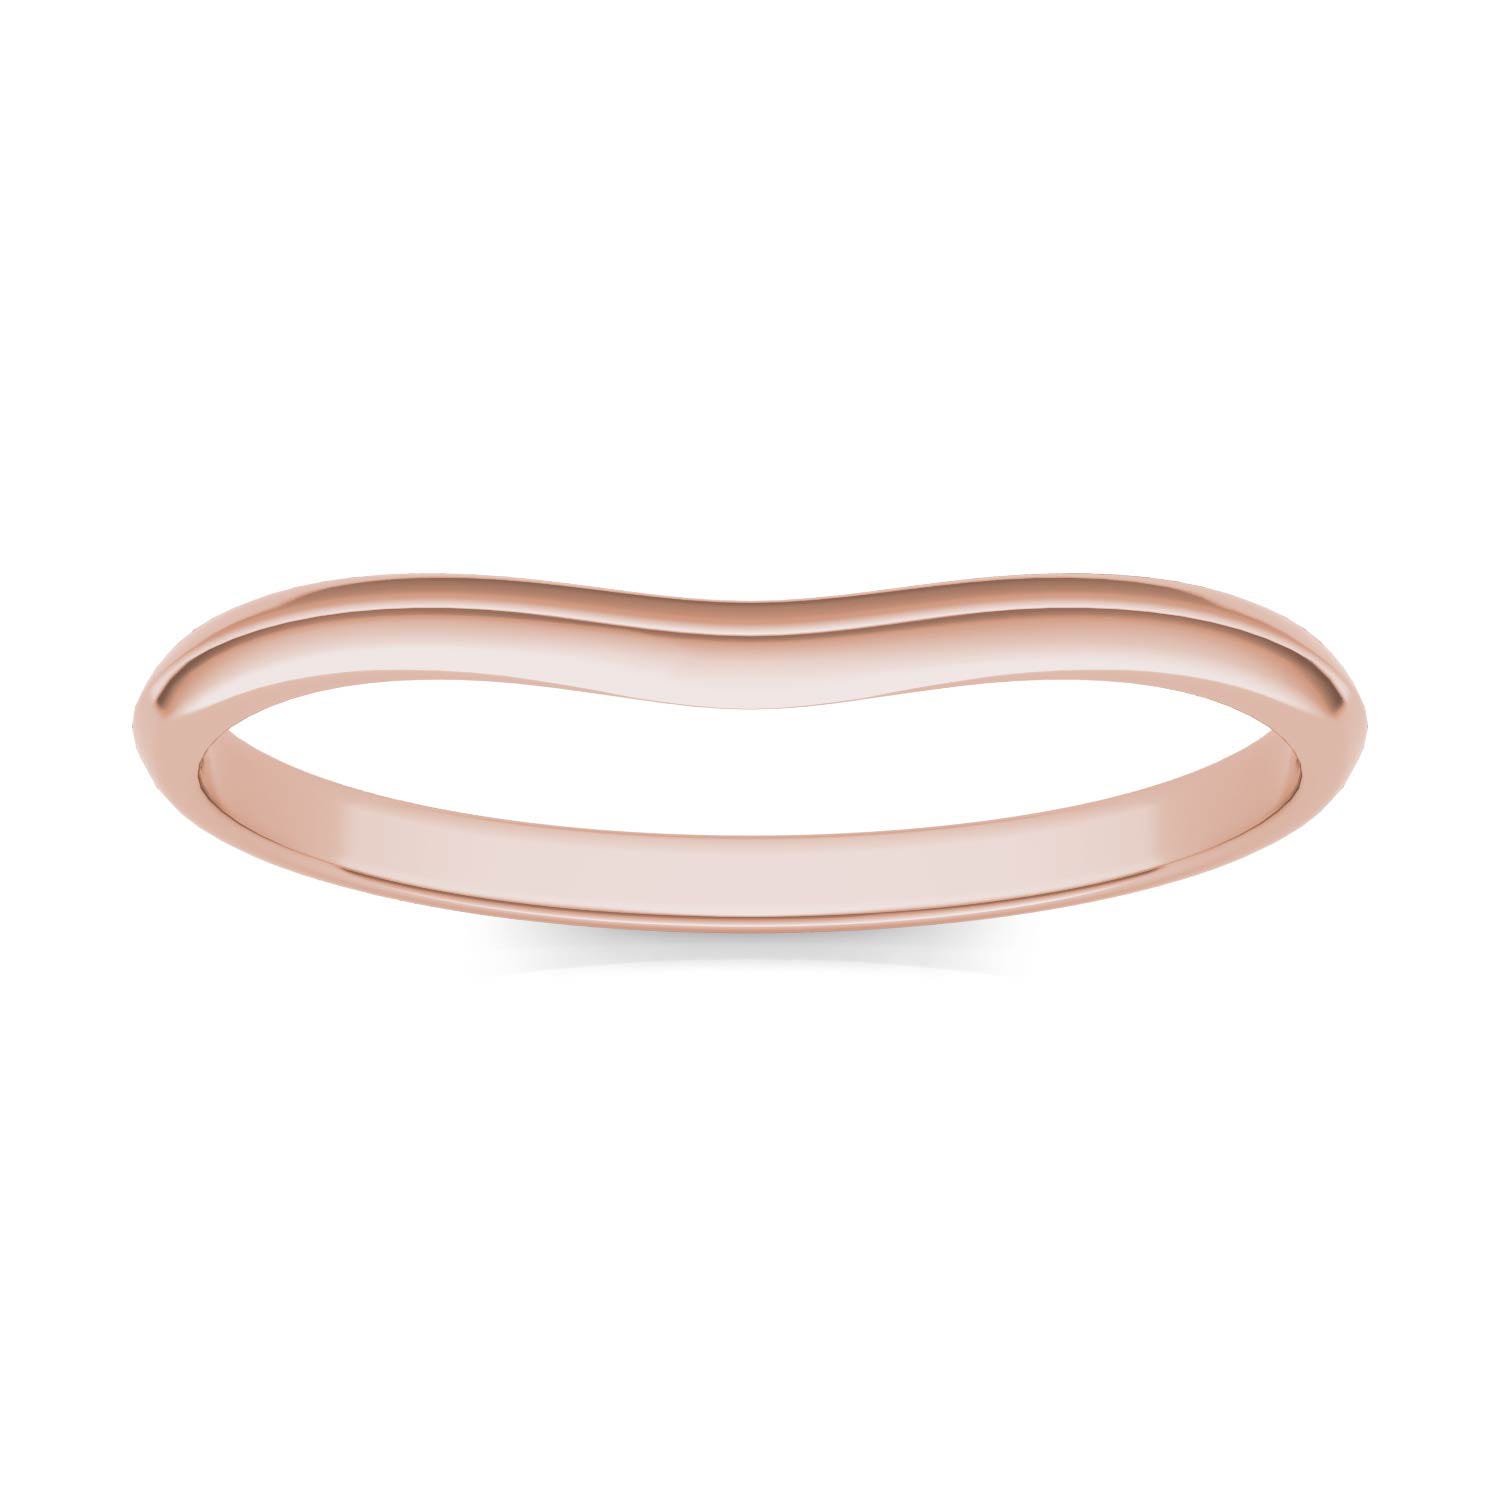 Signature Curved Plain 6mm Cushion Matching Band Wedding Ring in 18K Rose Gold, Size: 6.5 Charles & Colvard